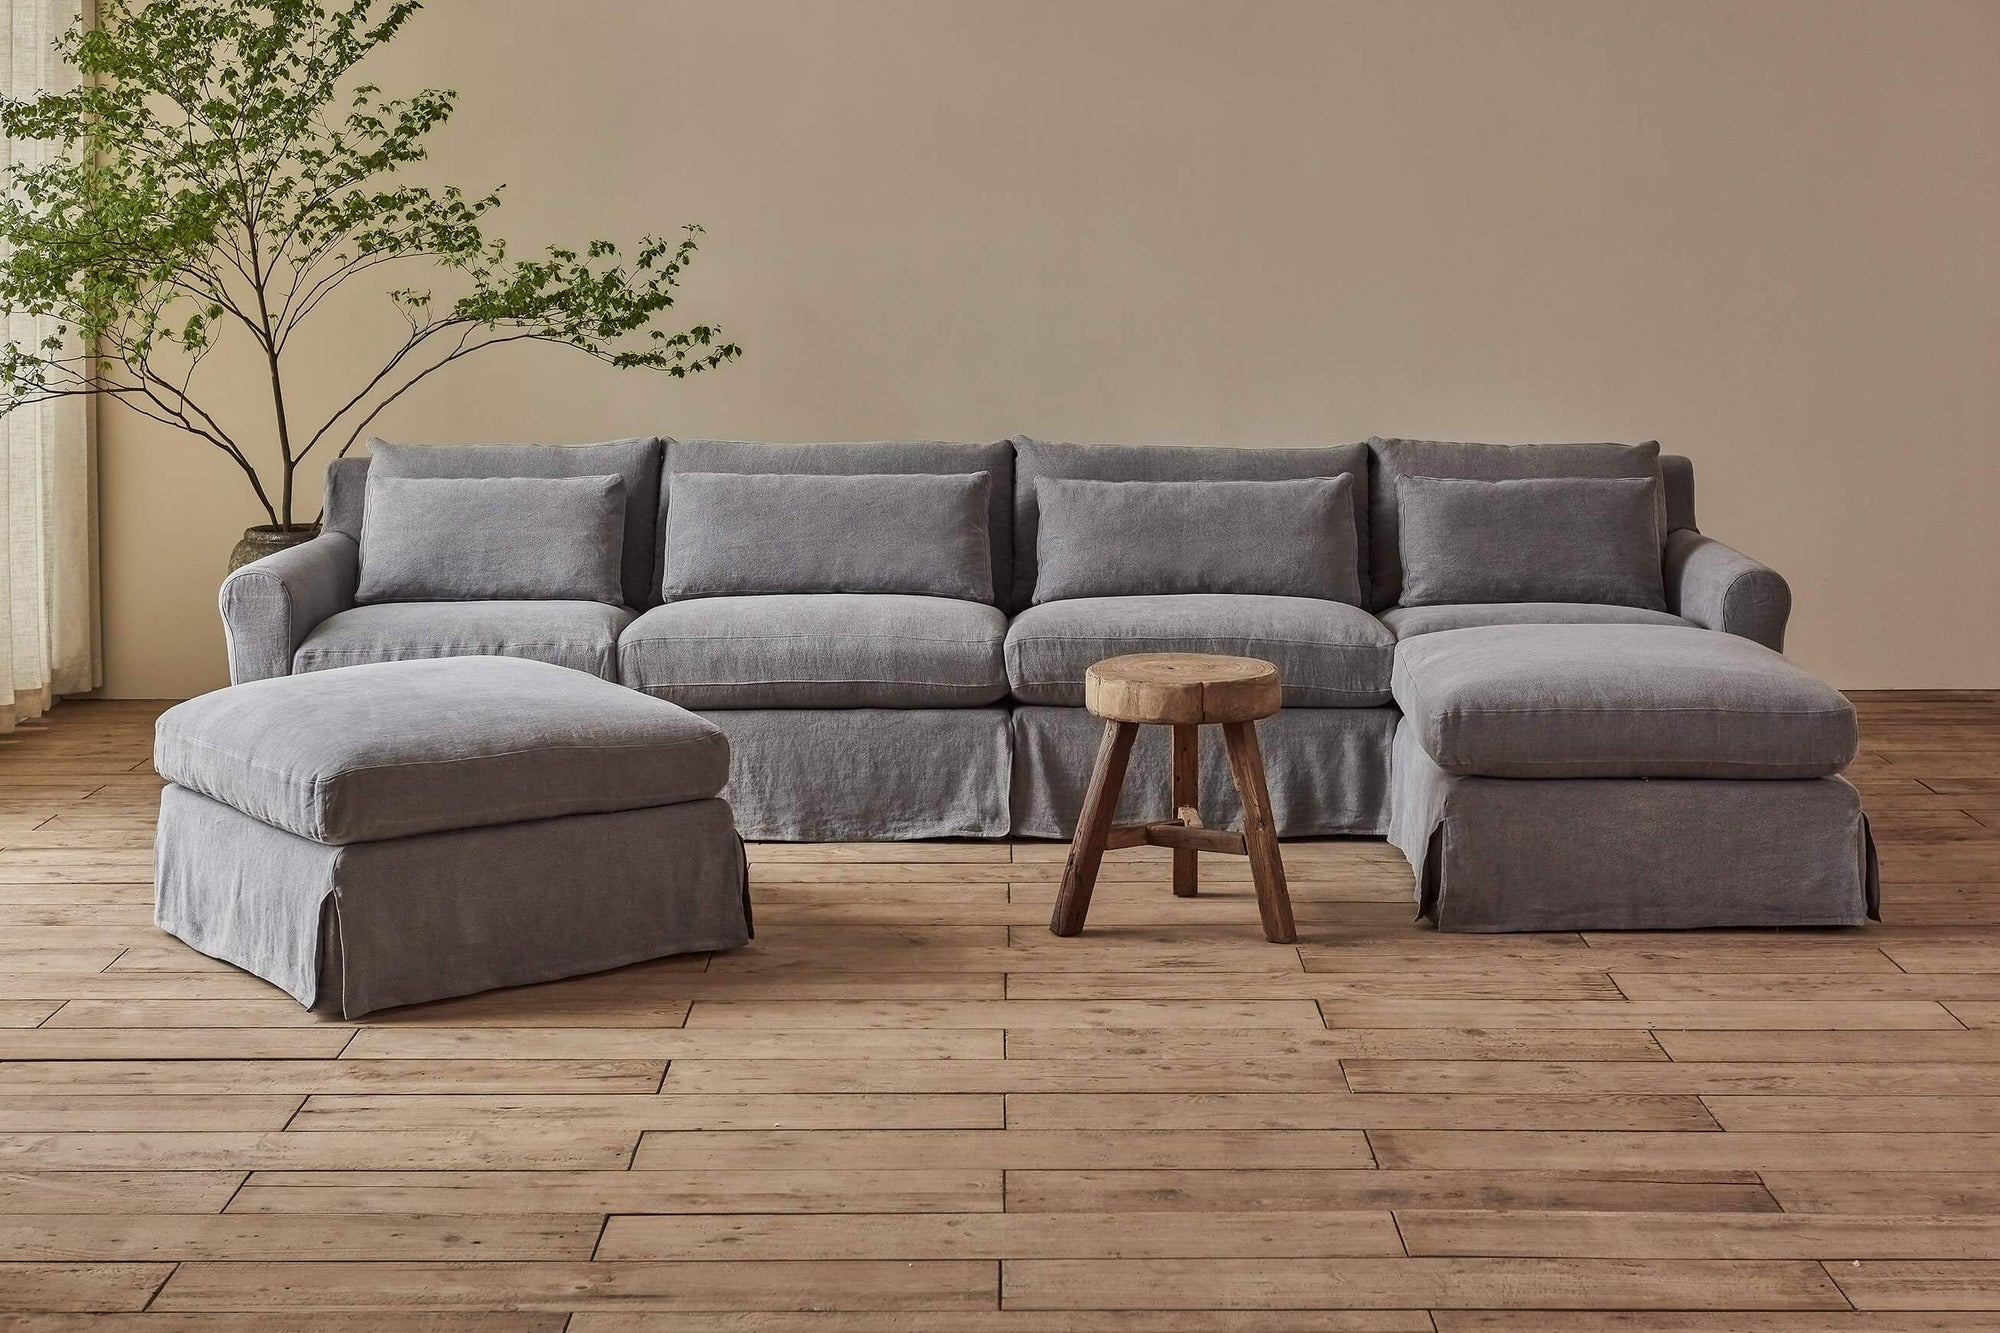 Elias U-Shape Sectional Sofa in Ink Cap, a medium cool grey Light Weight Linen, placed in a room between a potted tree and a stool